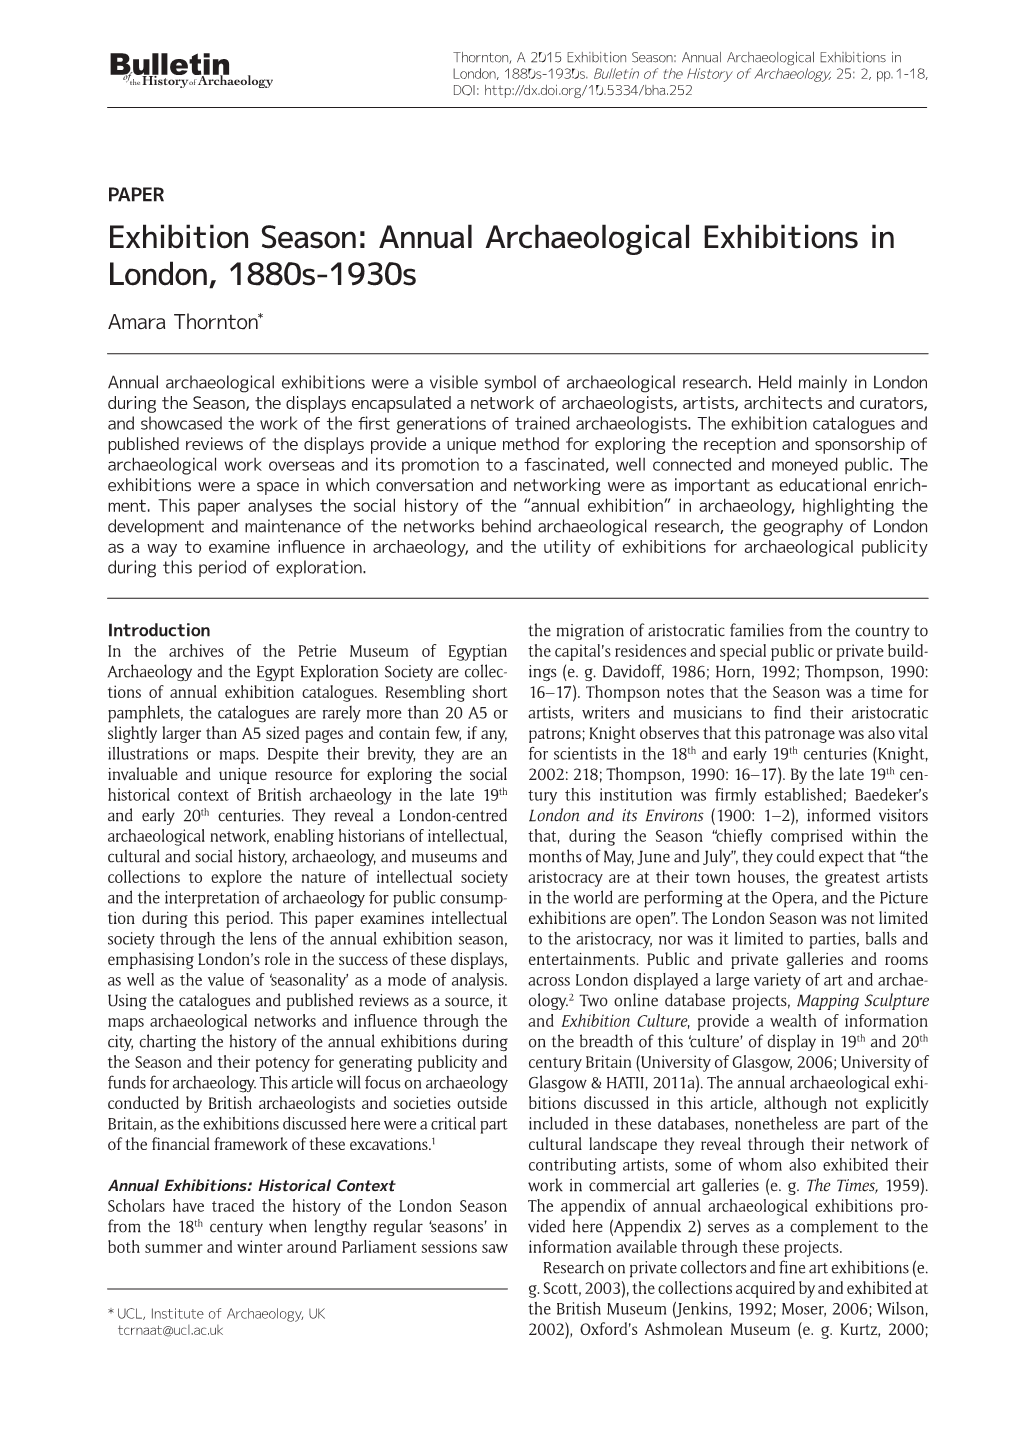 Annual Archaeological Exhibitions in London, 1880S-1930S Amara Thornton*